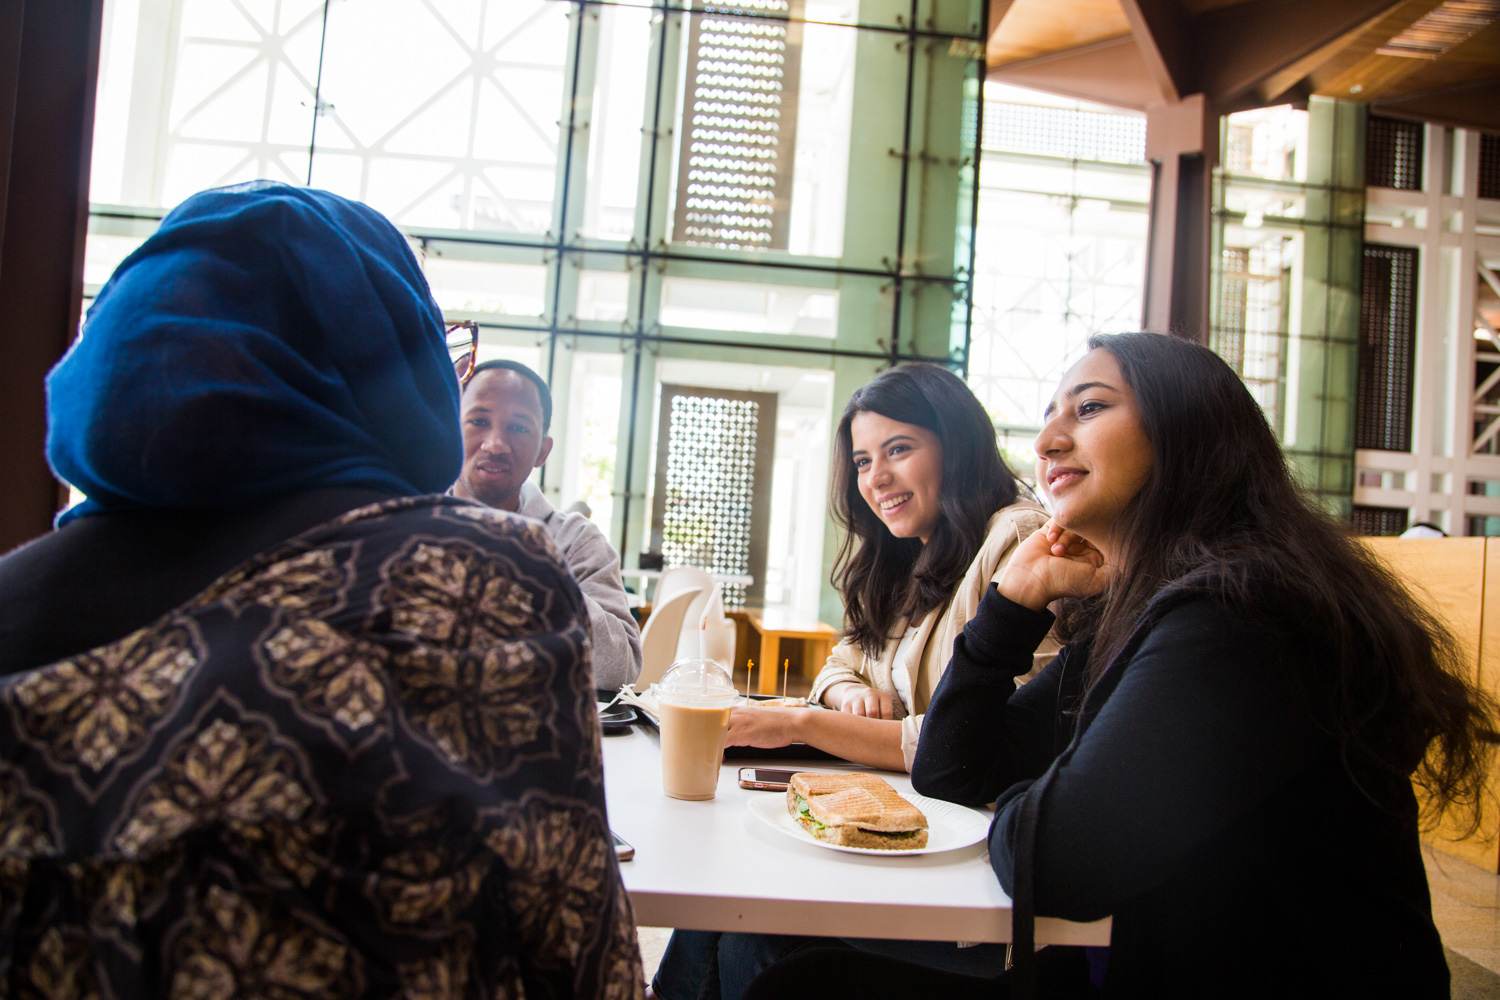 Students share a meal at HBKU Student Center on the Education City campus.